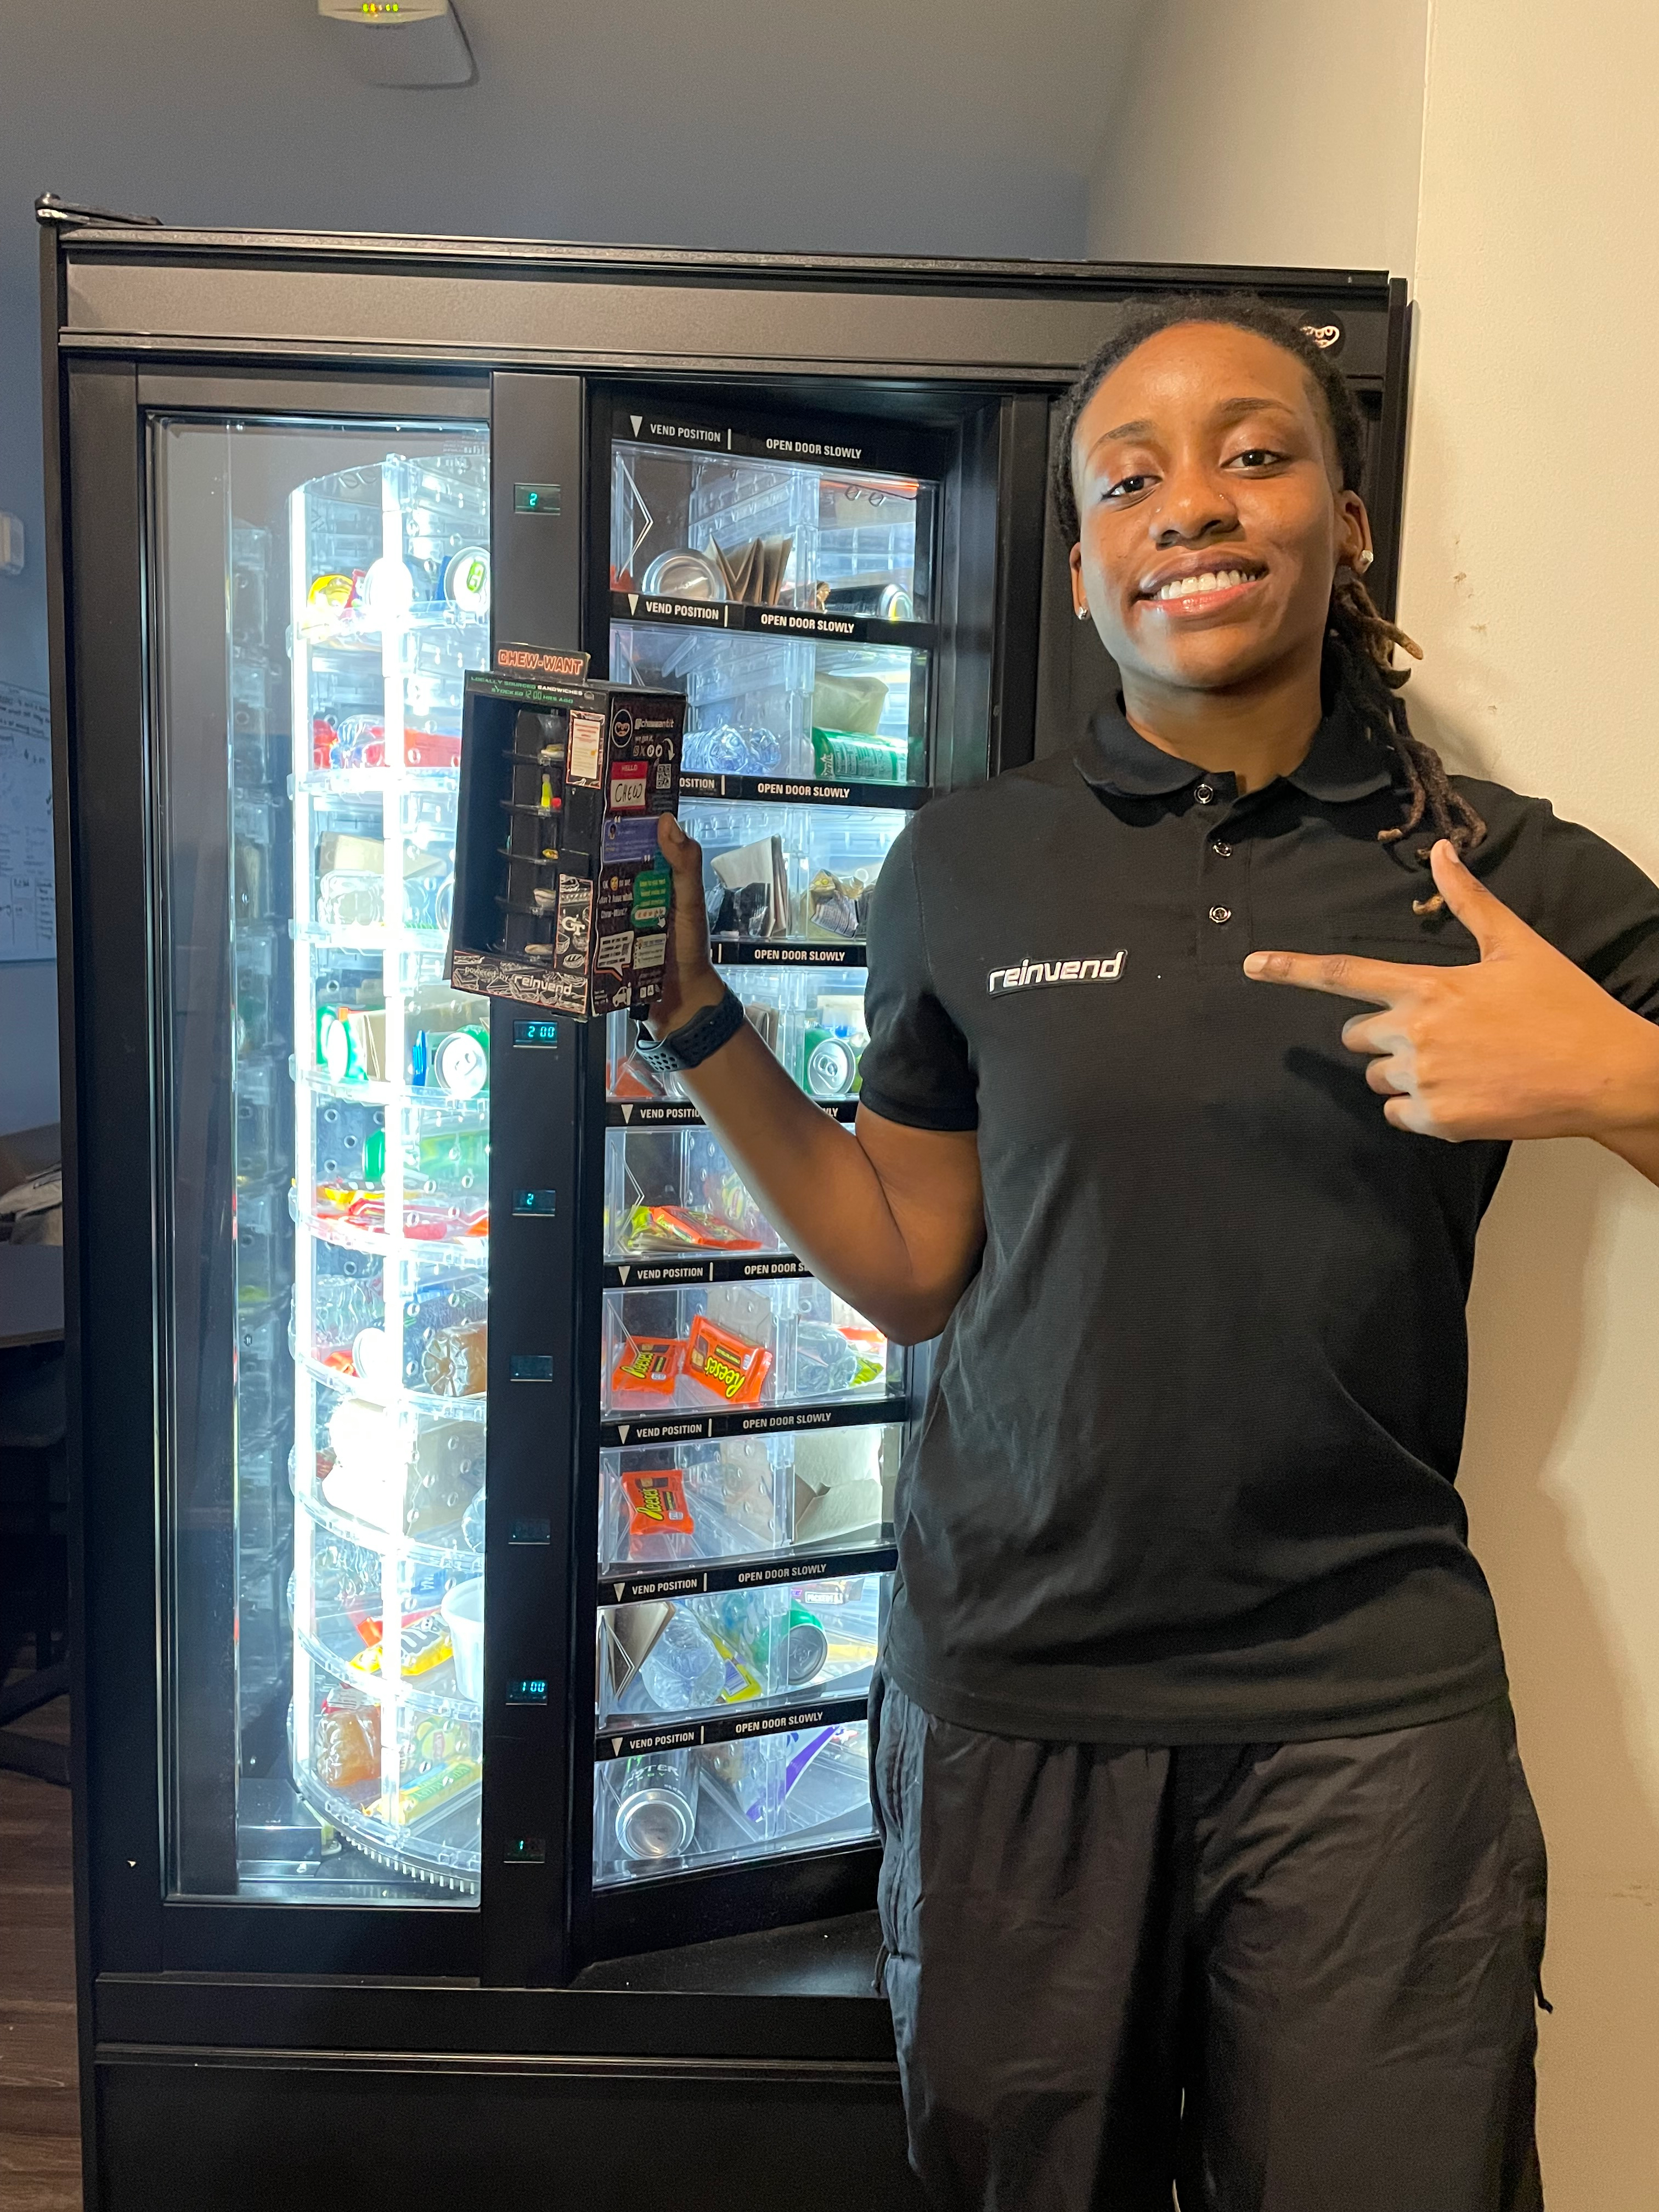 Co-founder Kiandra Peart poses with a prototype of Reinvend in front of a campus vending machine.